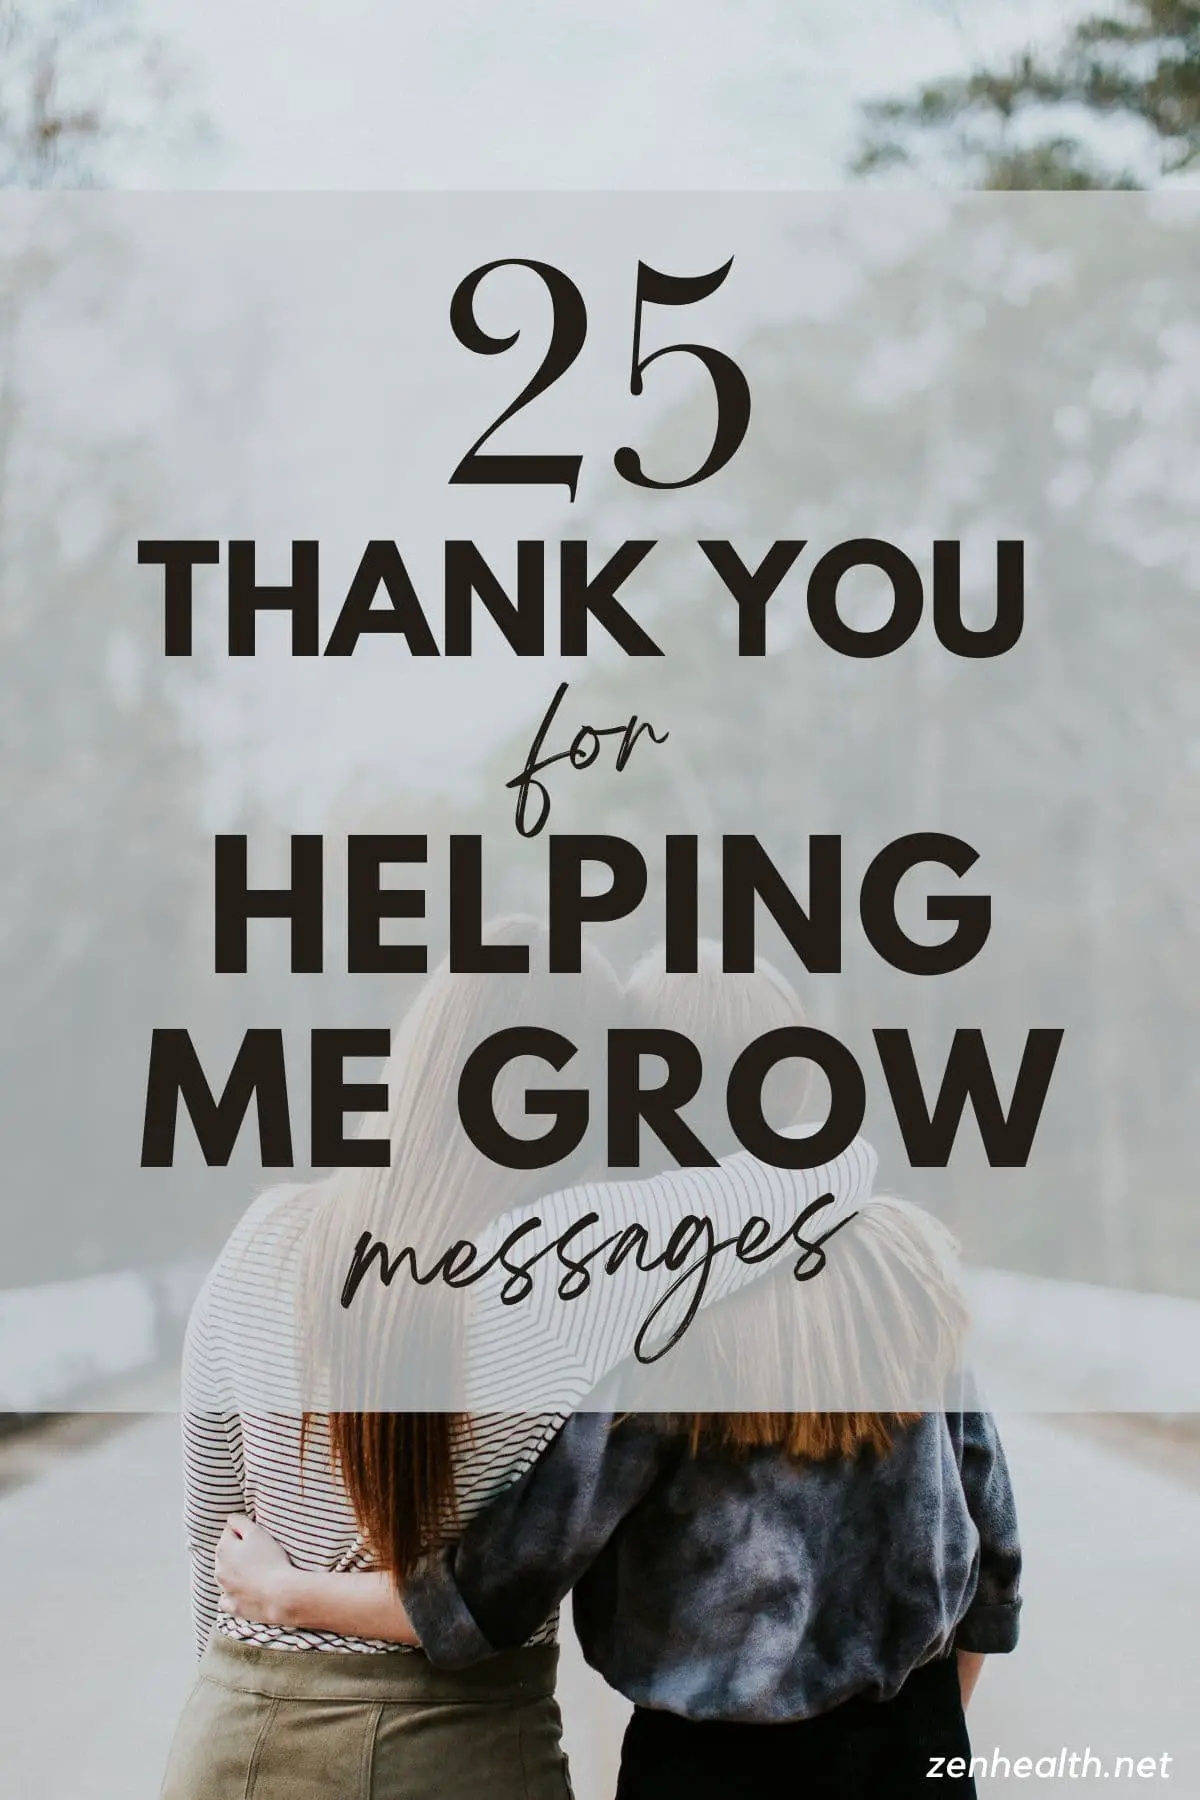 25 thank you for helping me grow messages text overlaid on two women hugging